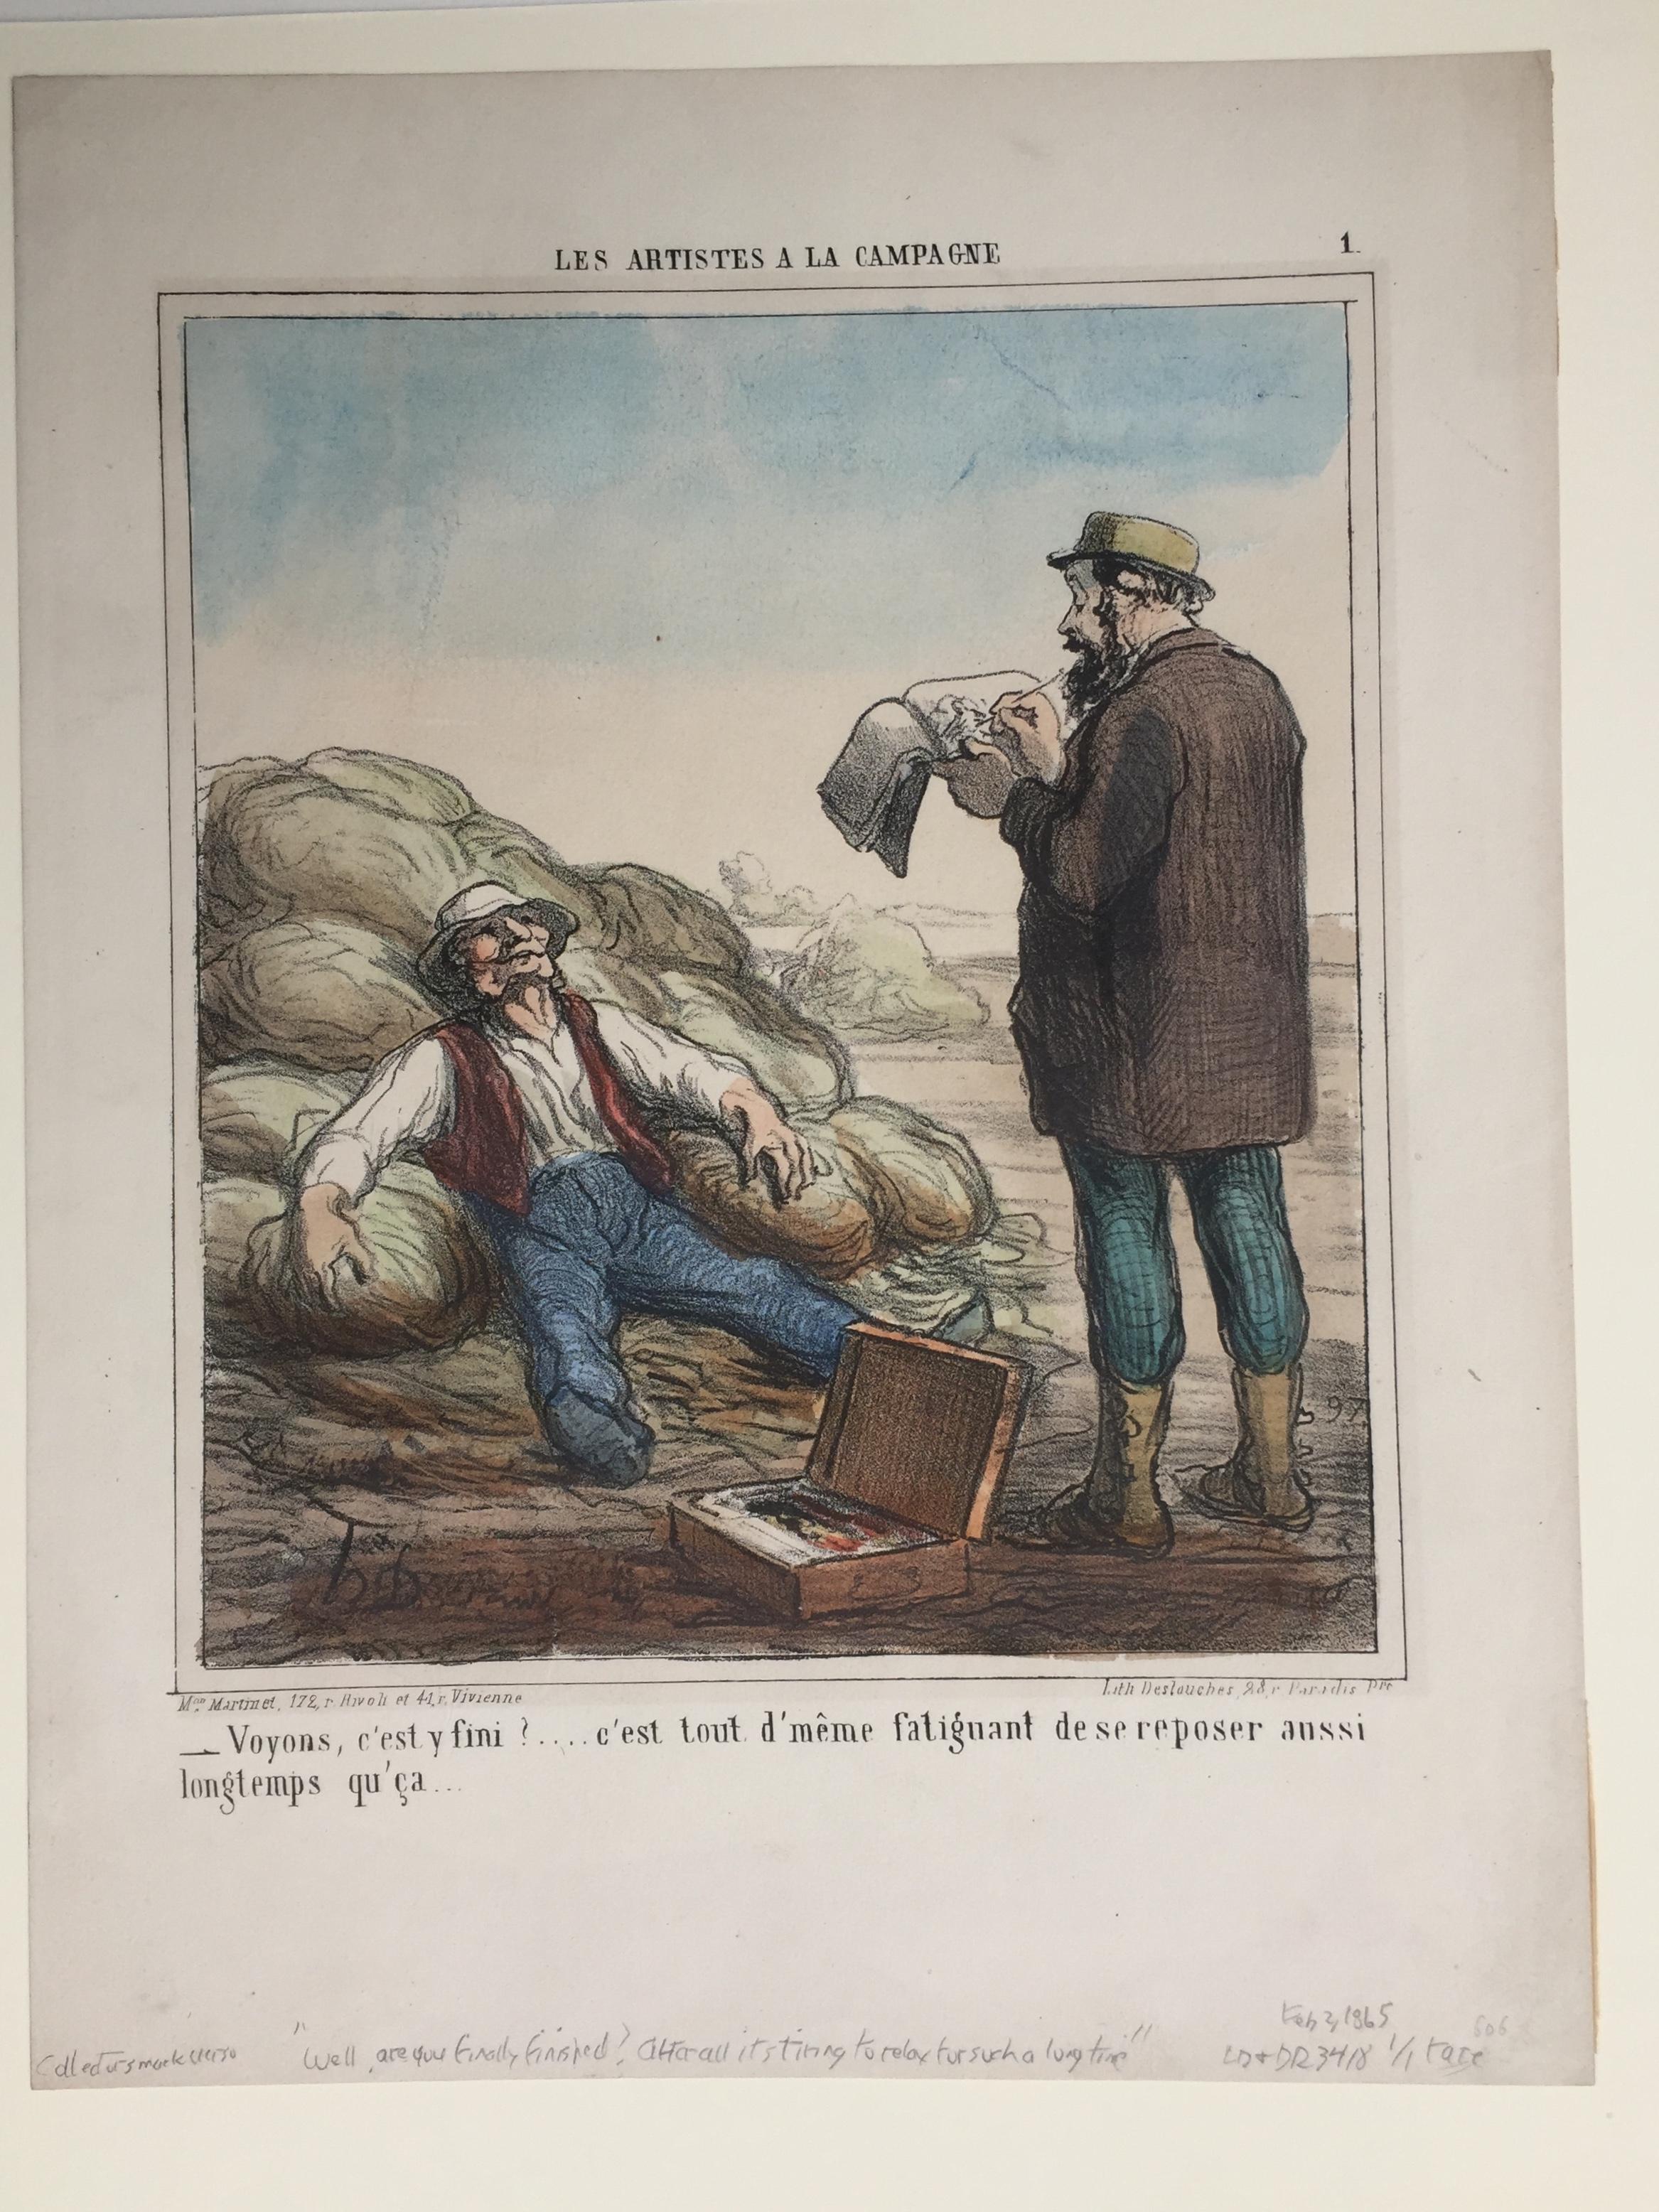 ARTIST IN THE COUNTRYSIDE - Print by Honoré Daumier